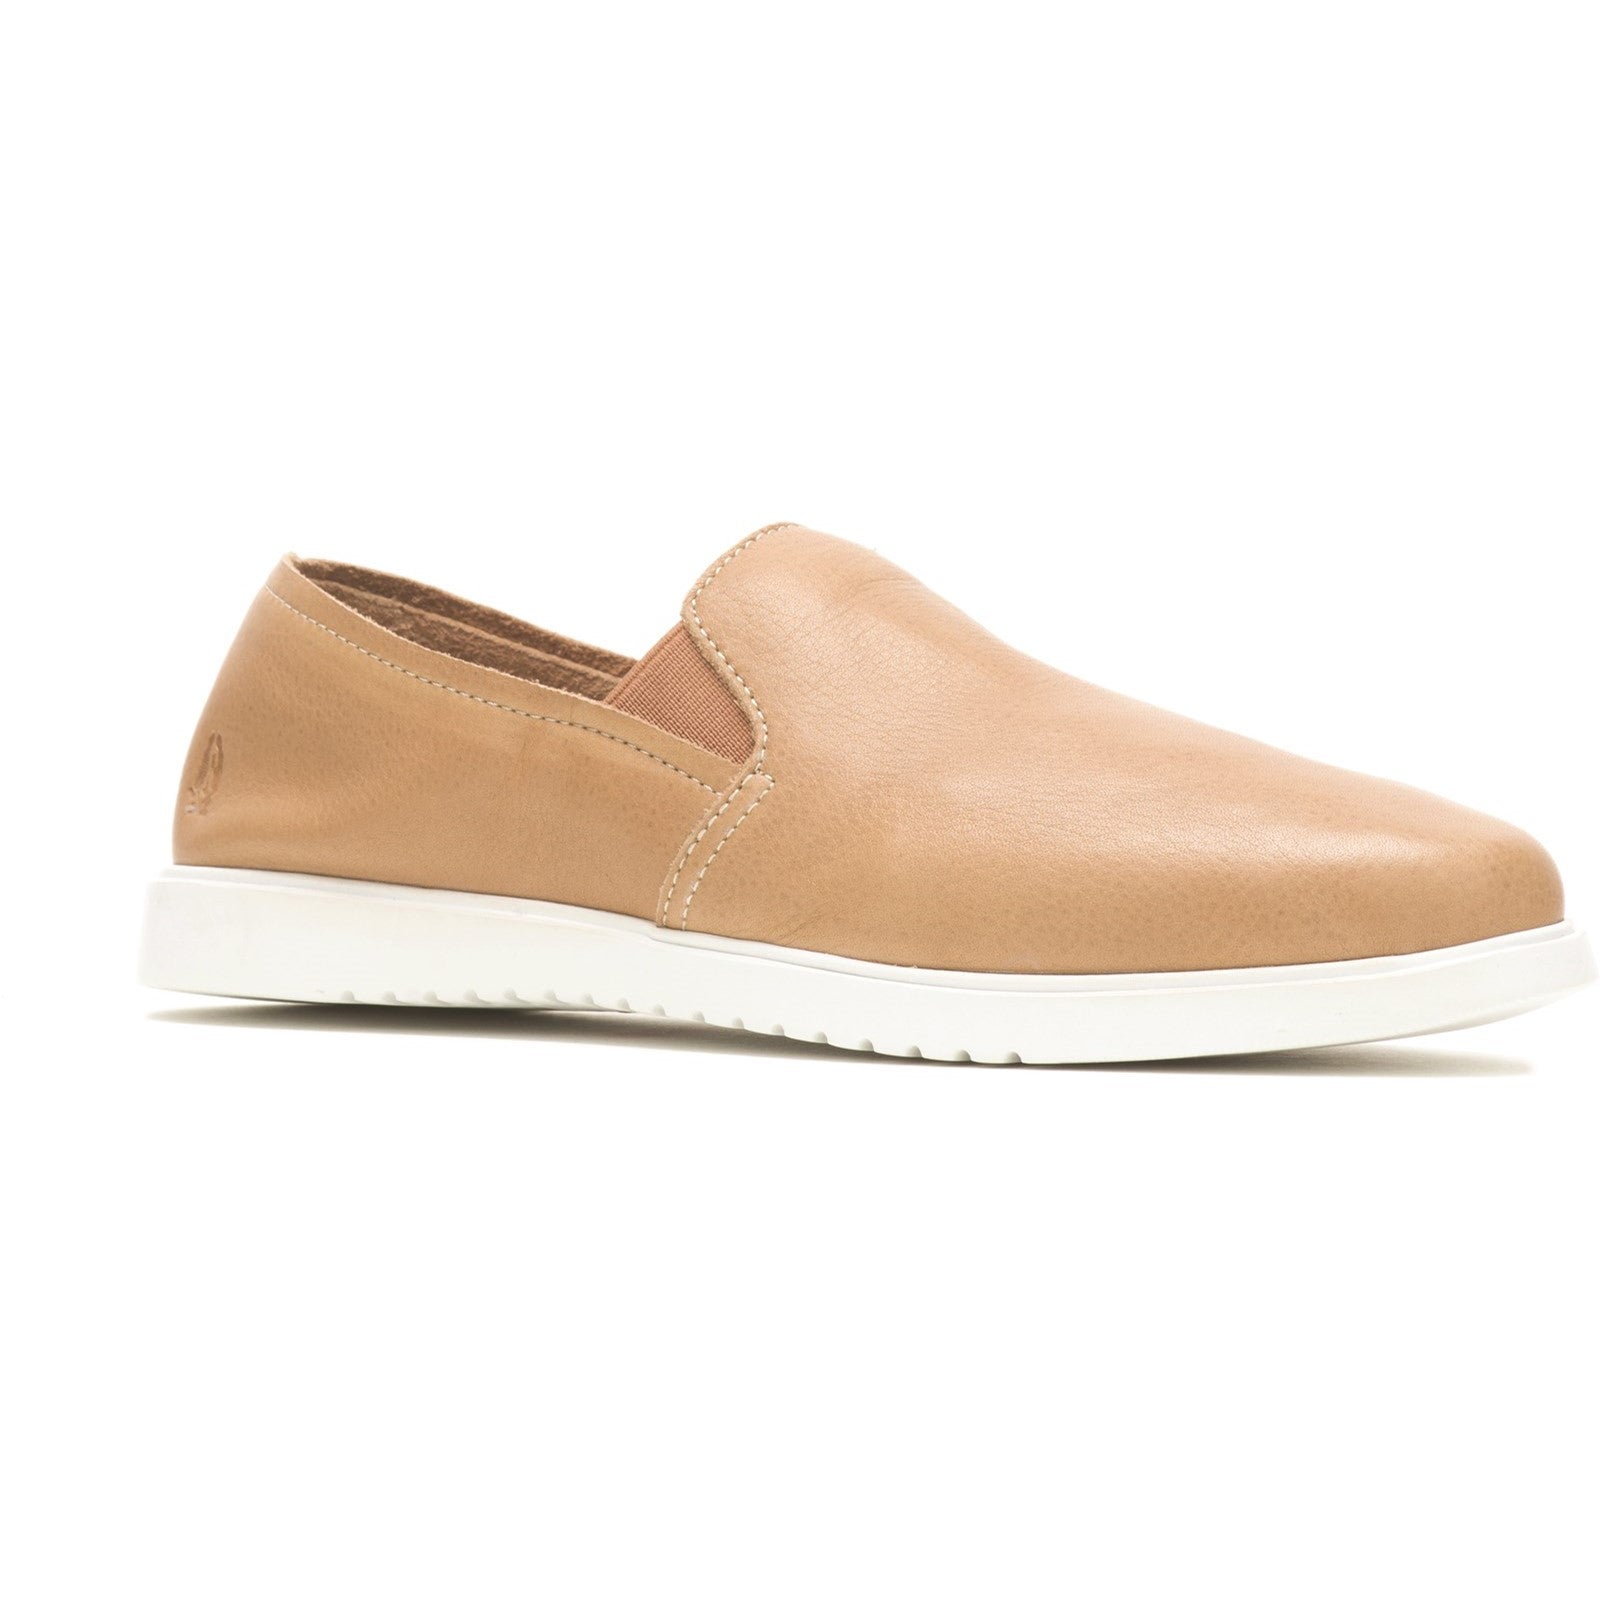 Slip On Ladies Shoes Tan Hush Puppies Everyday Slip On Shoes